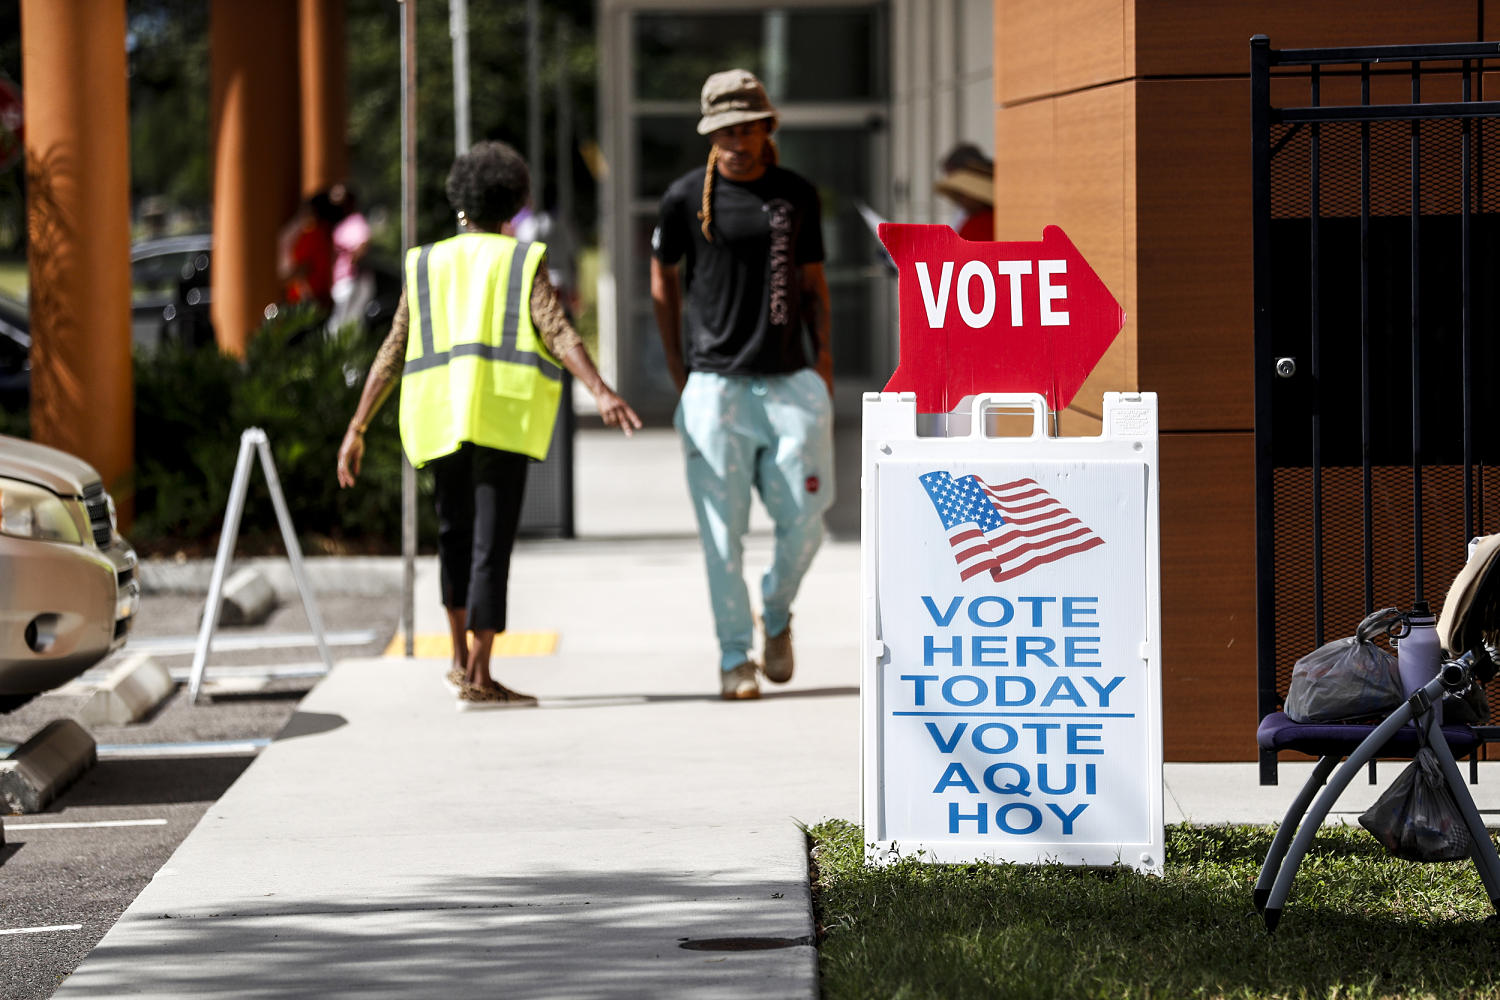 federal judge rules florida can't ban noncitizens from registering voters